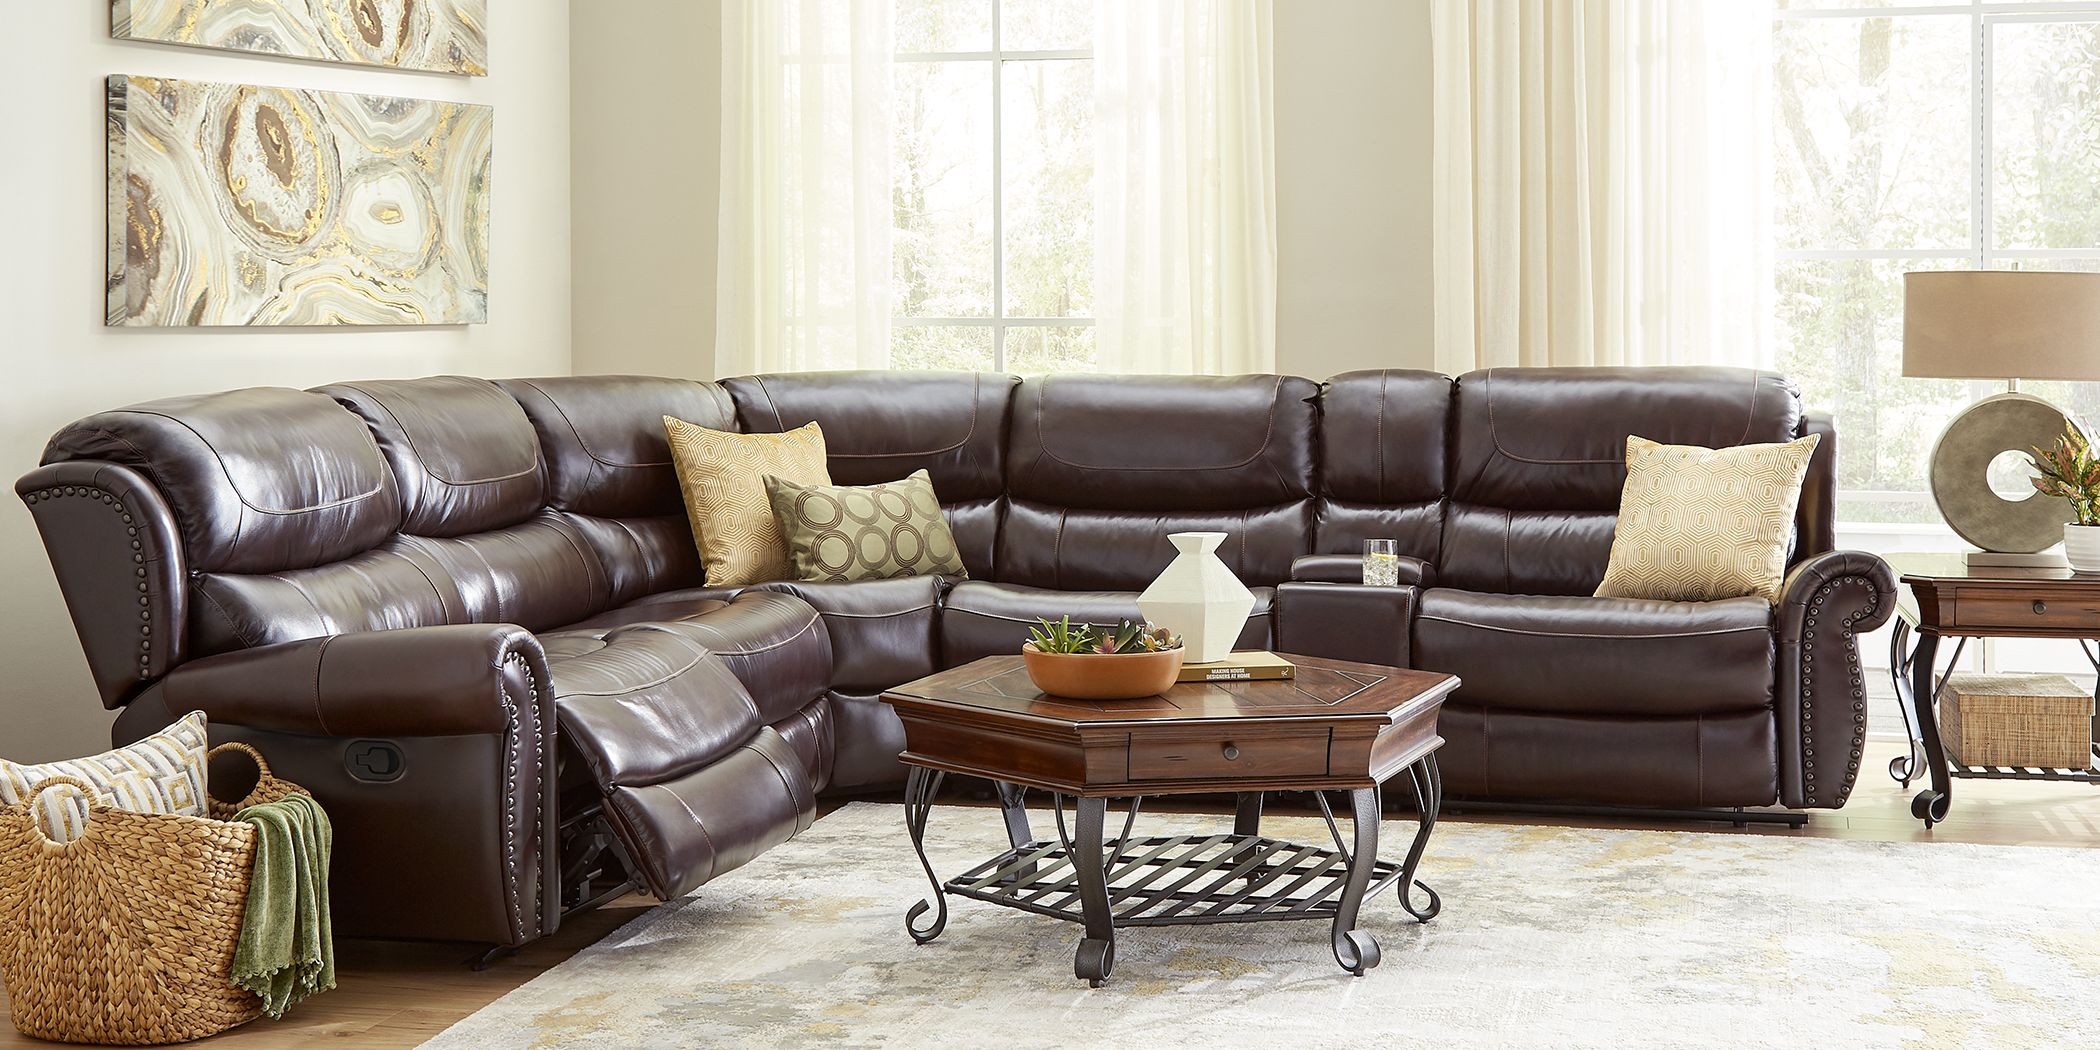 leather sectional living room sets